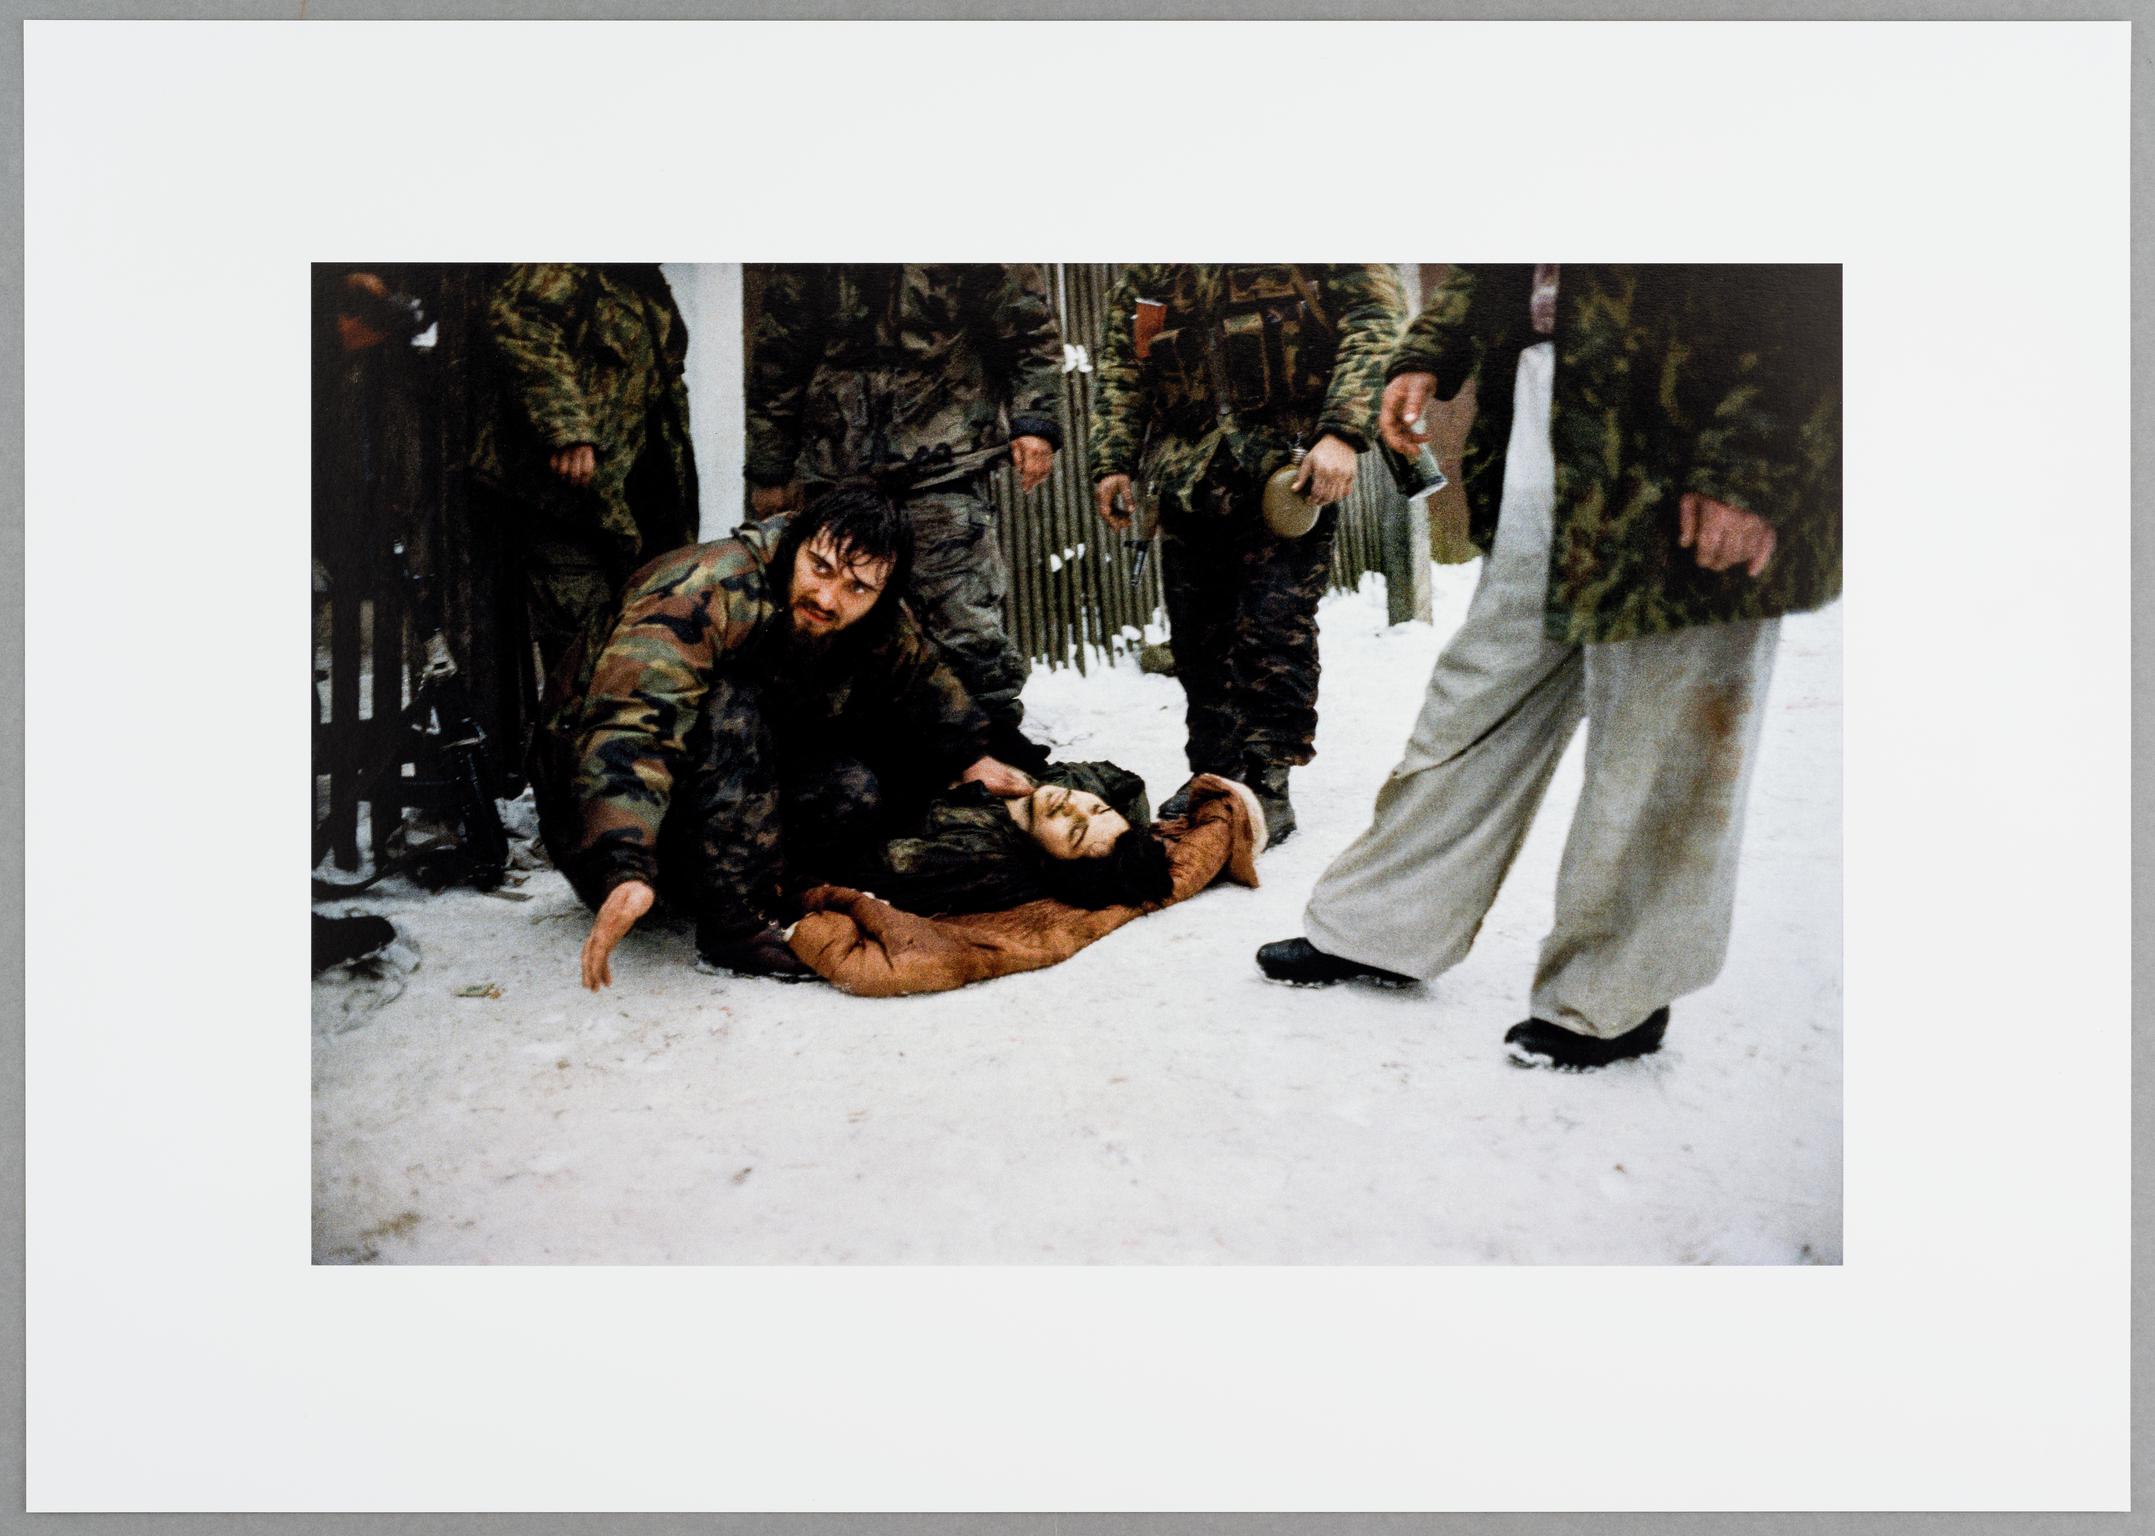 Chechen fighters try to save a injured comrade, who died few hours later.